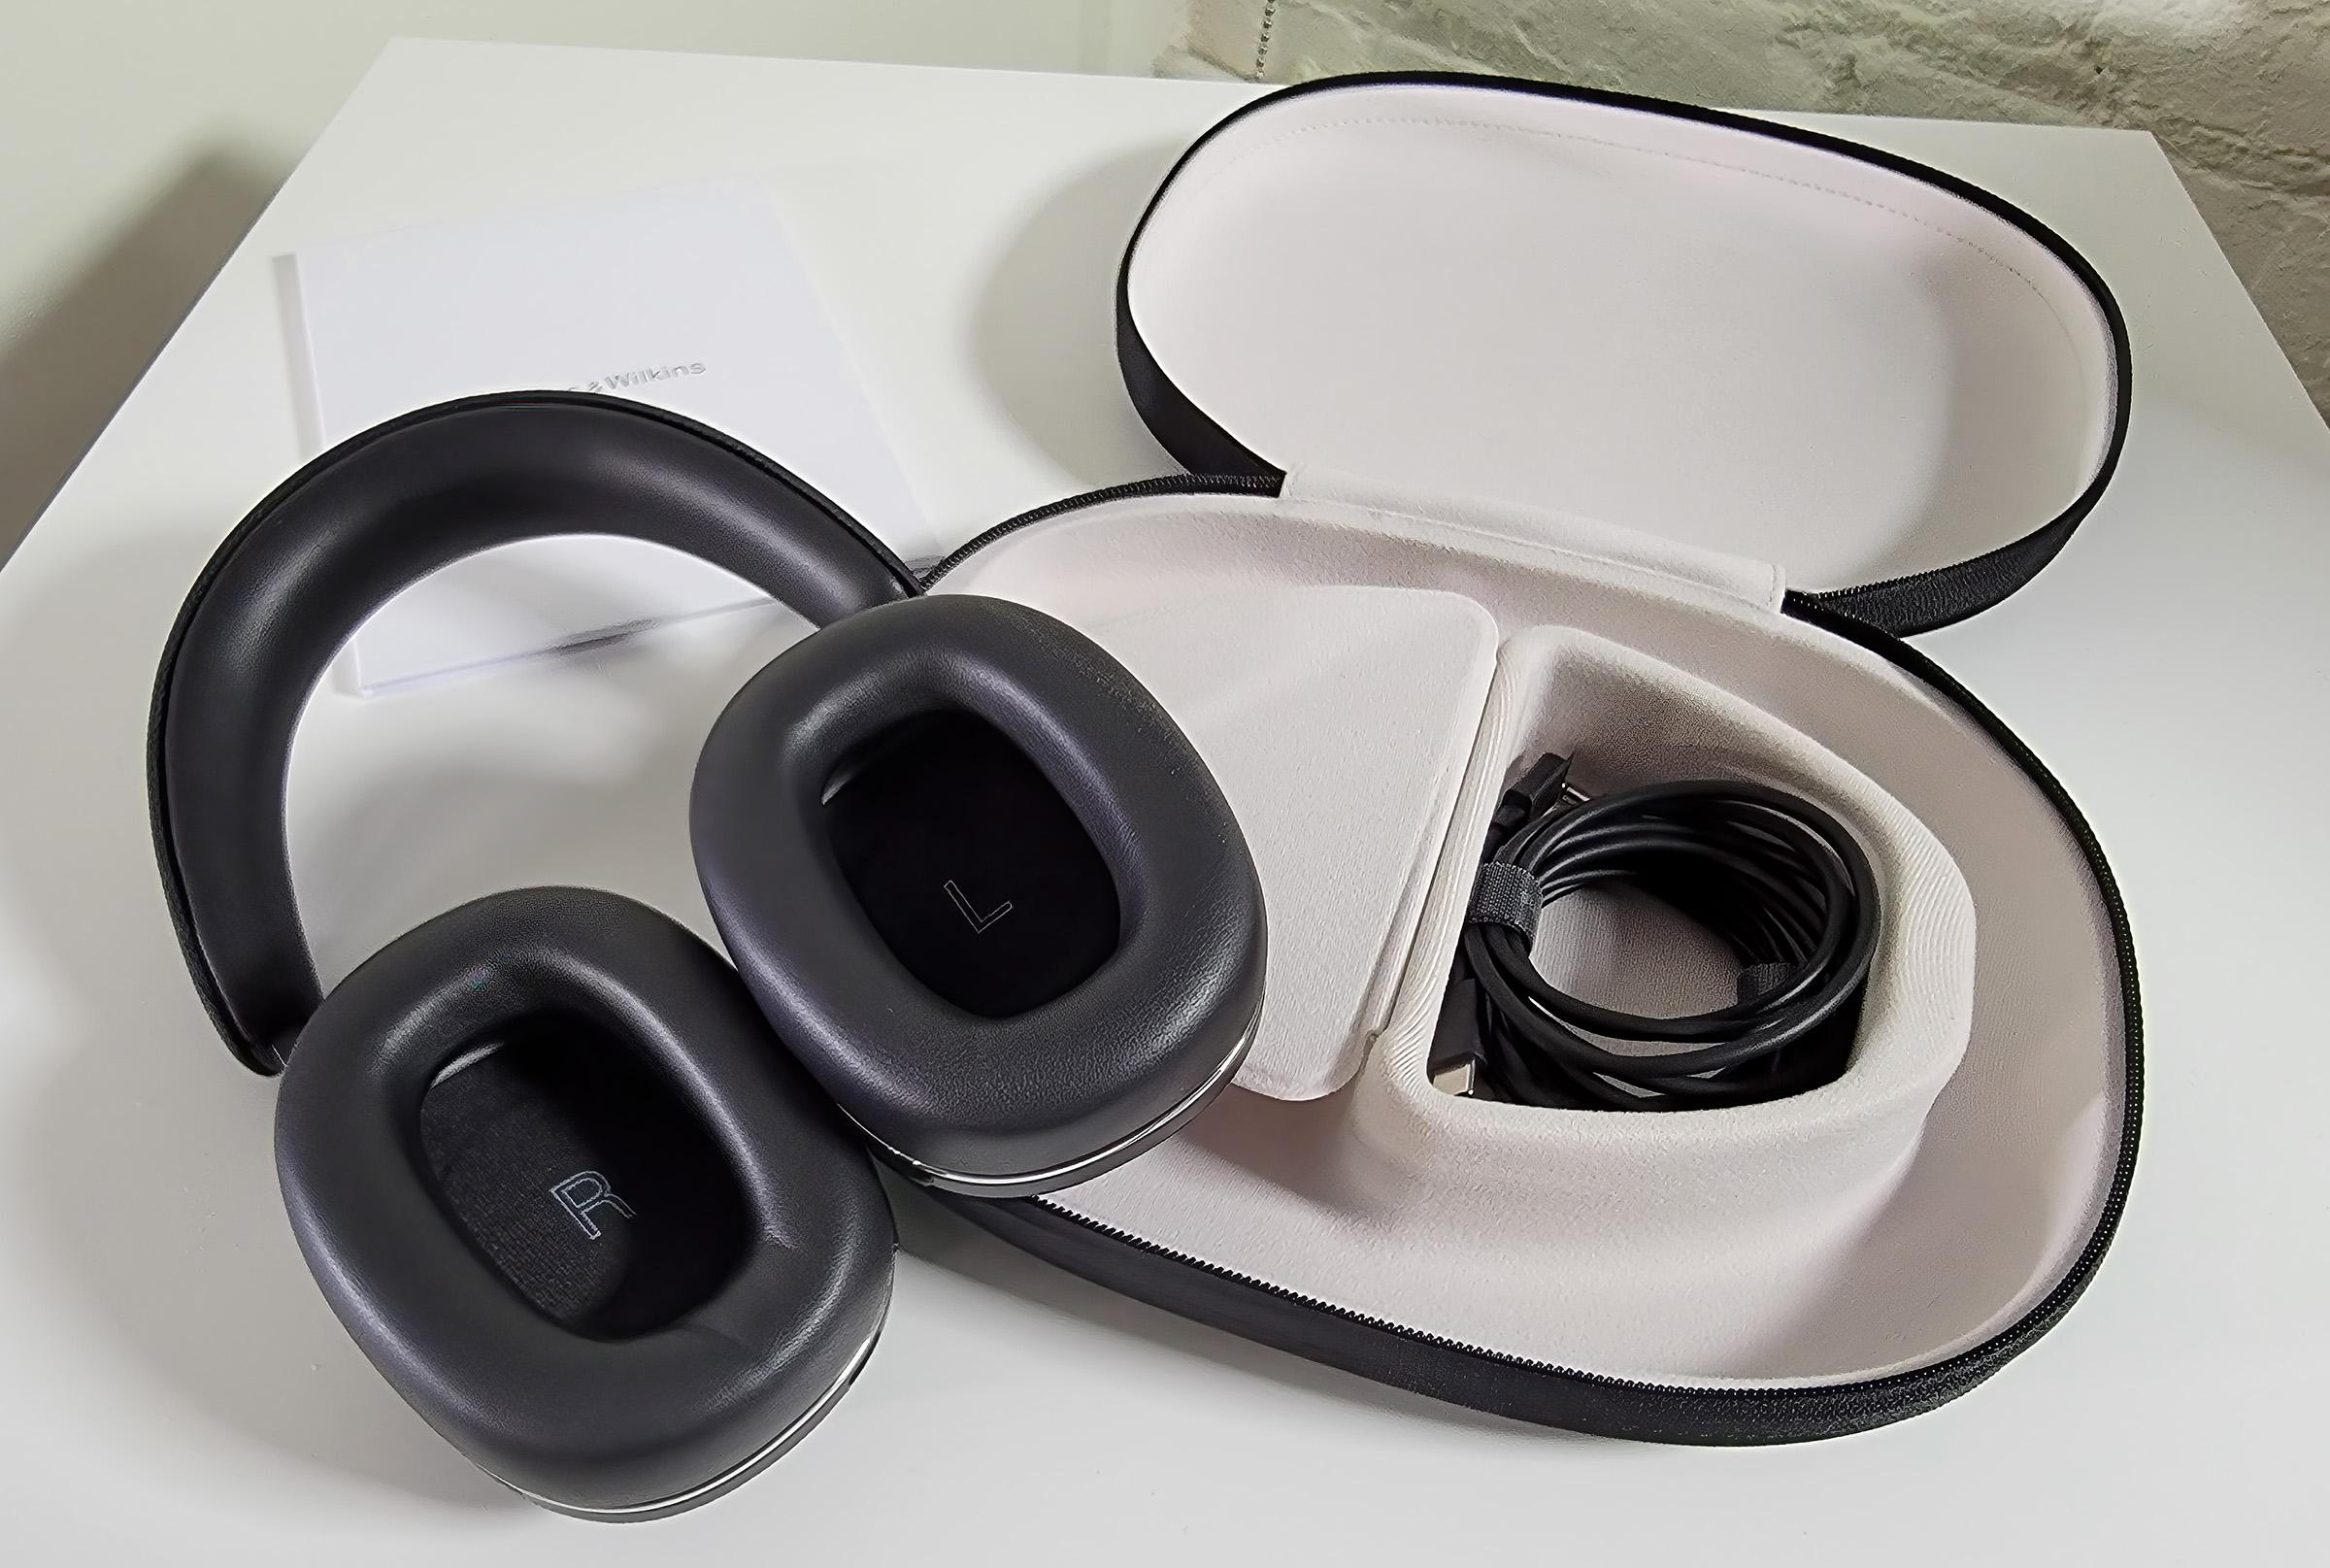 True luxury and high performance define these exceptional headphones f90002a3 bowers wilkins px7 s2 inside earcups